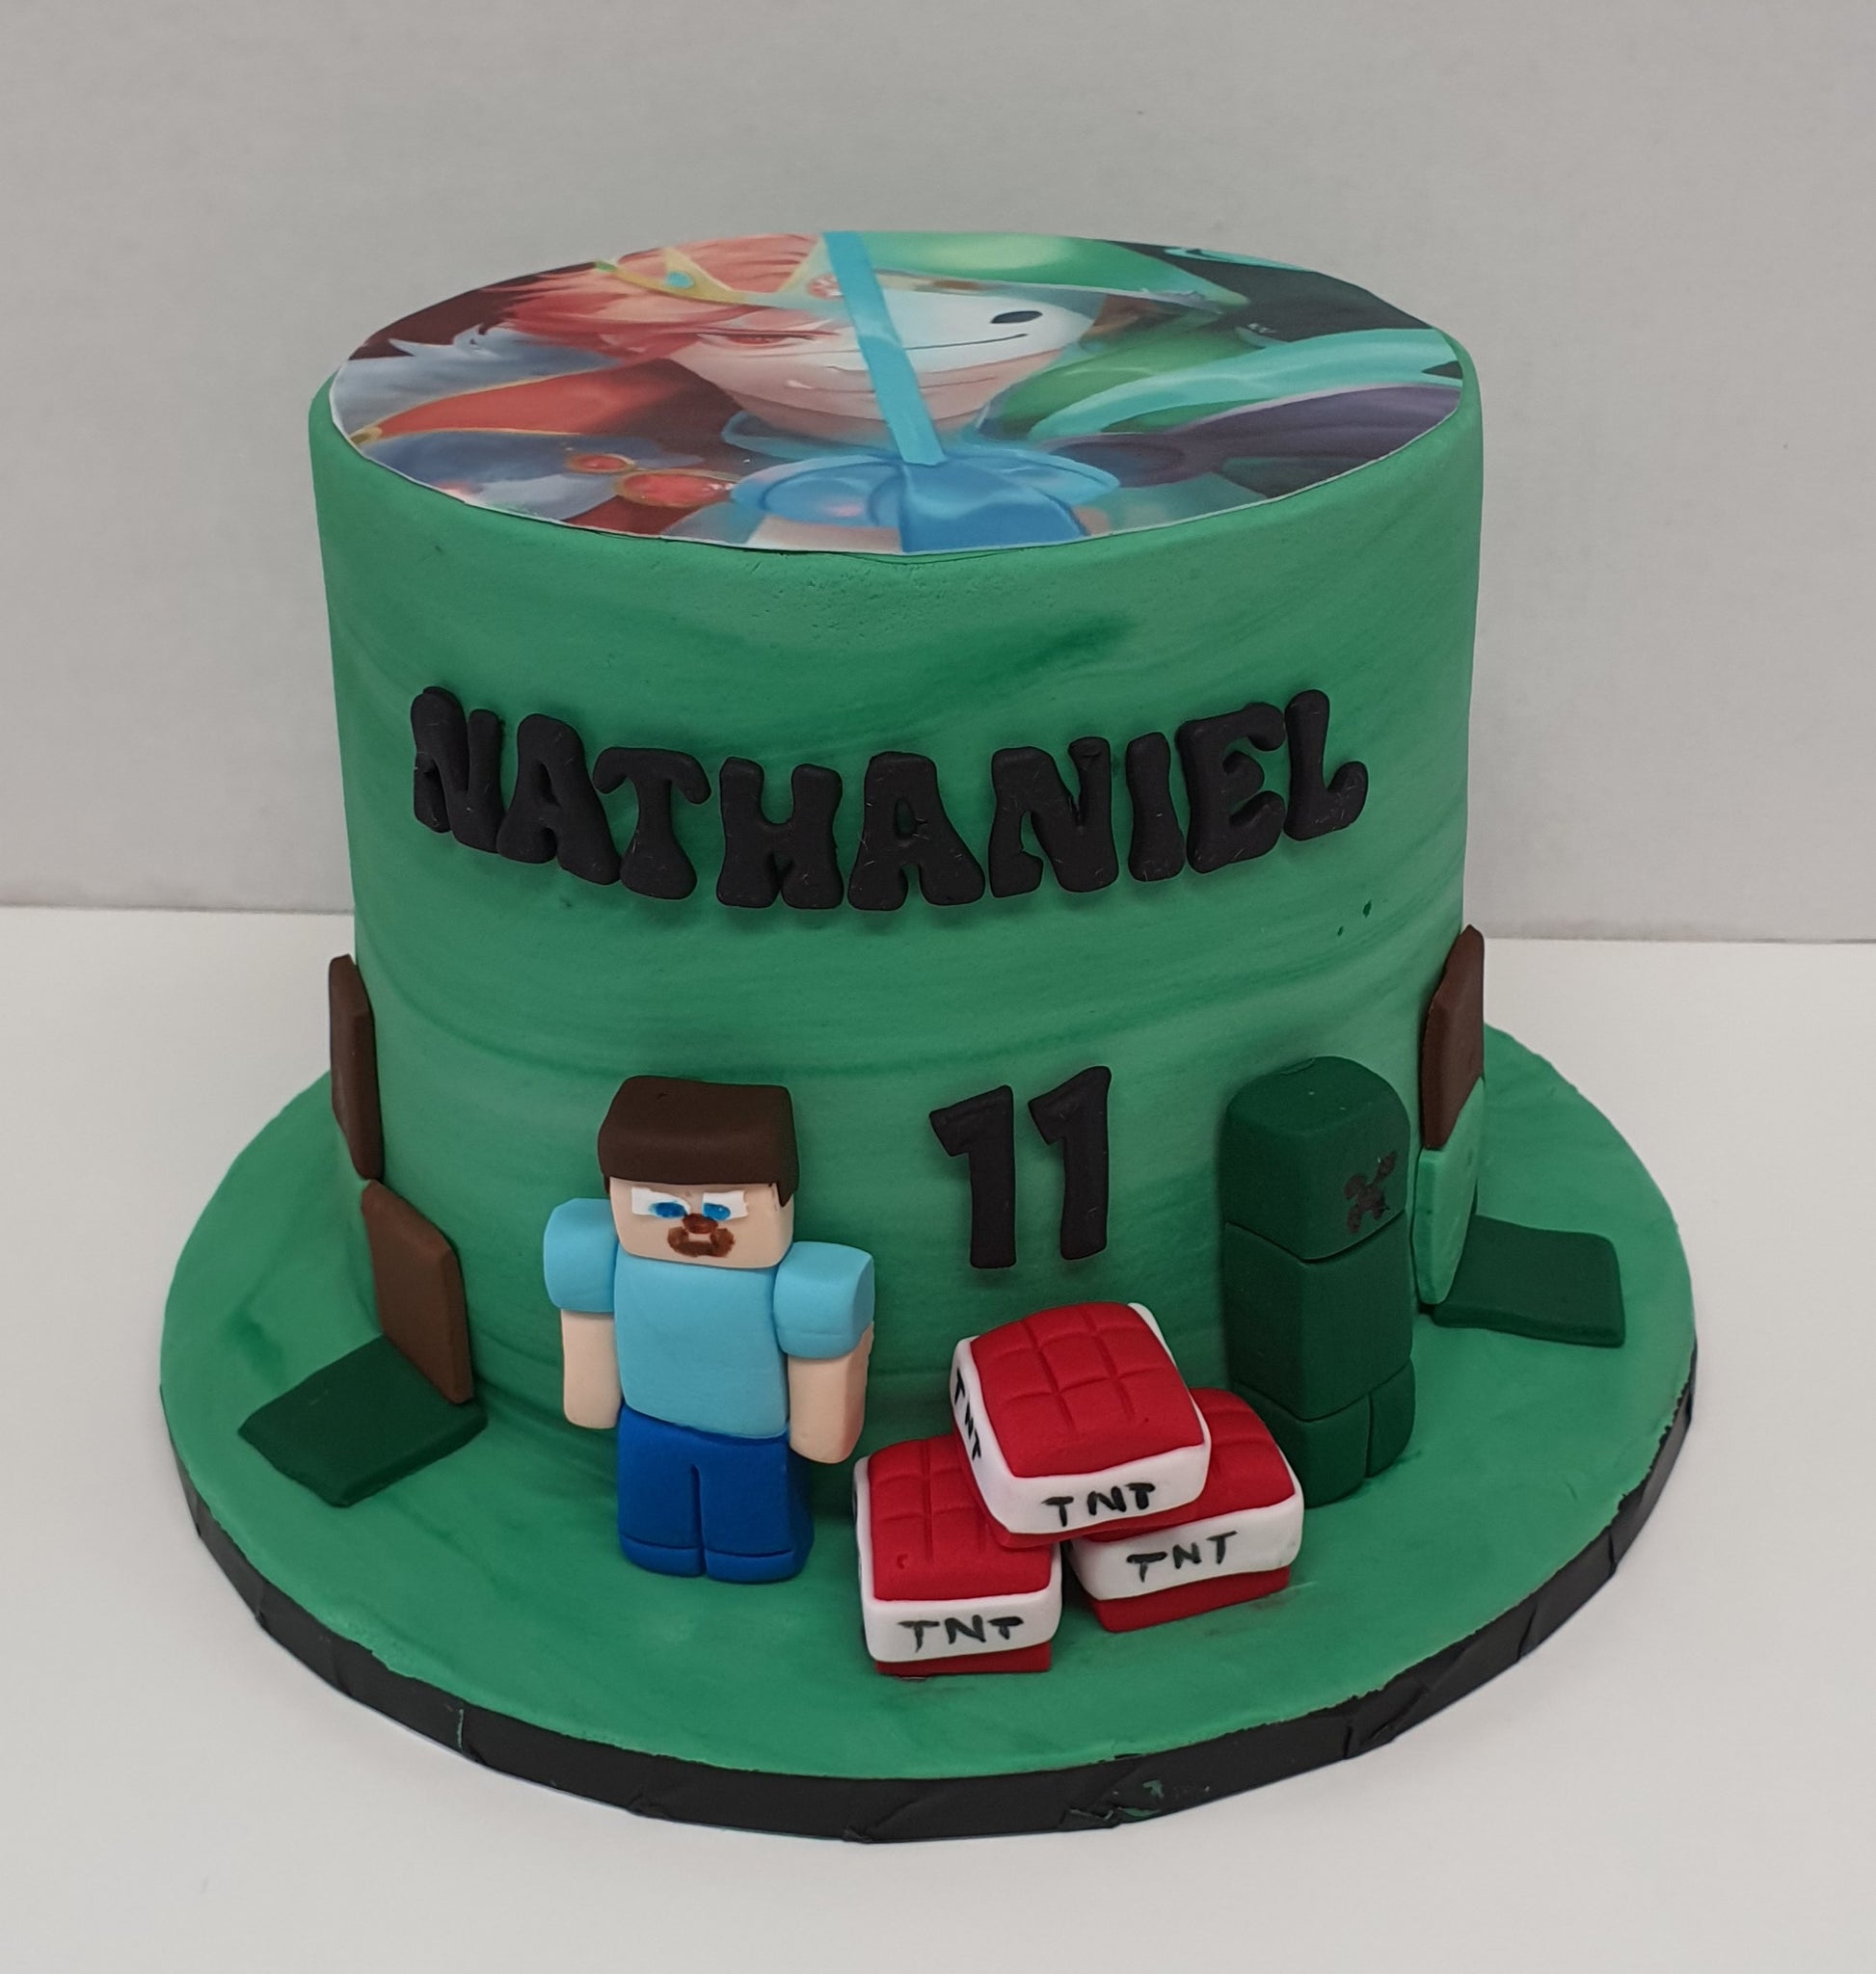 Homemade Cakes by Irma - Looking for the coolest minecraft cake ever? Look  no further than this cake ♥️ A delectable cake covered in delicately  crafted frosting. Topped with laser cut customized